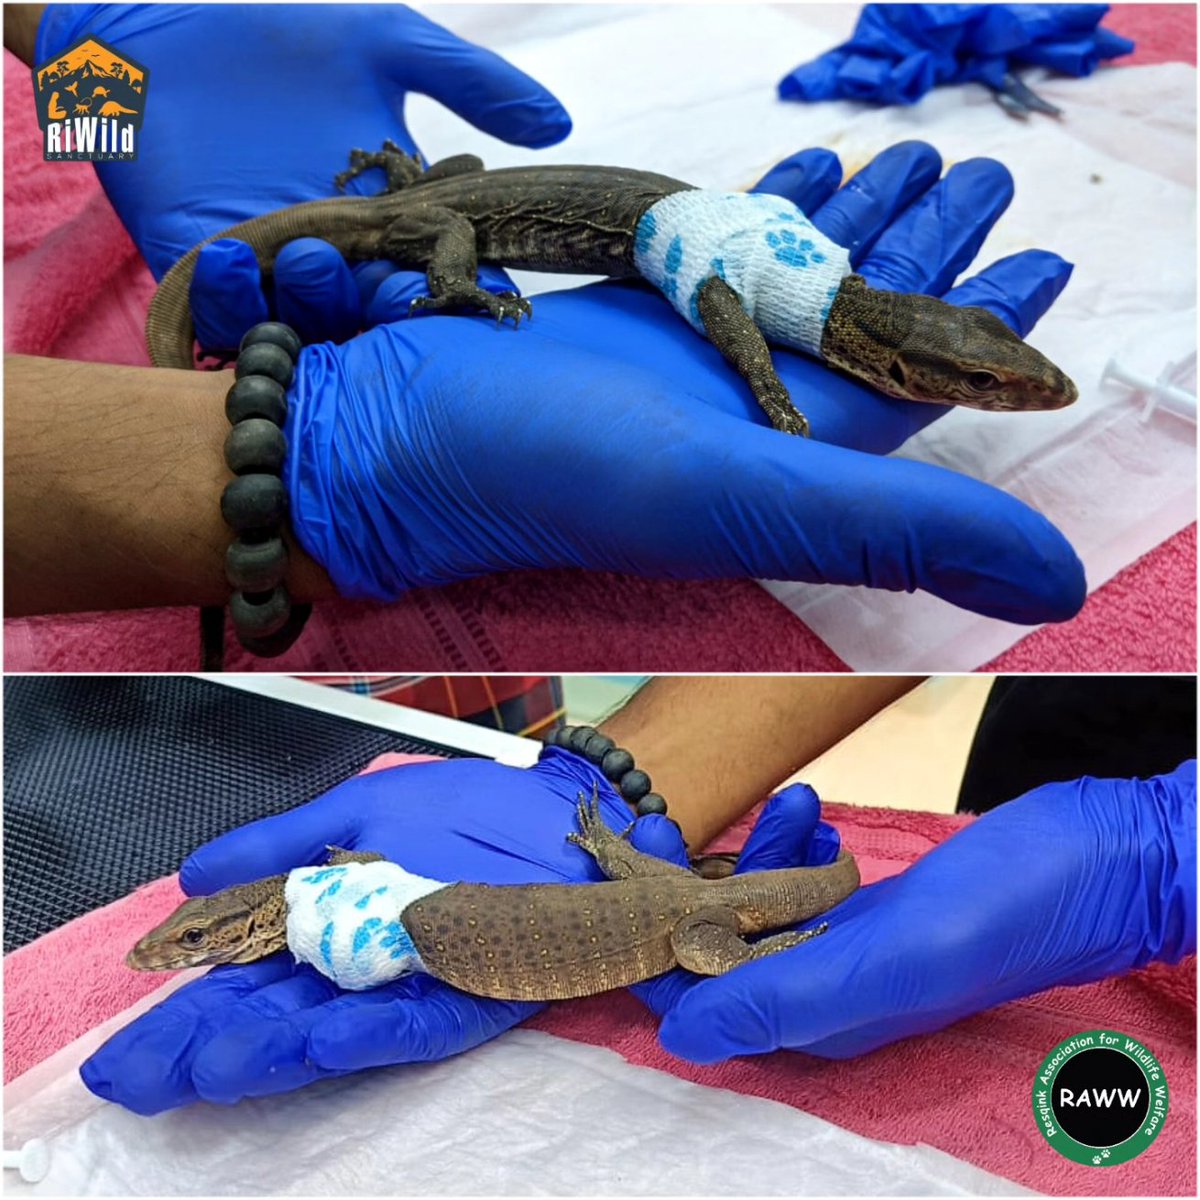 #Thane Baby monitor lizard pelted with stones, loses limb

In a shocking incident, a juvenile monitor lizard was rescued by our team member @Amansin33118522 from Thane's #WagleEstate after it was found injured by locals. (1/n)

@ranjeetnature